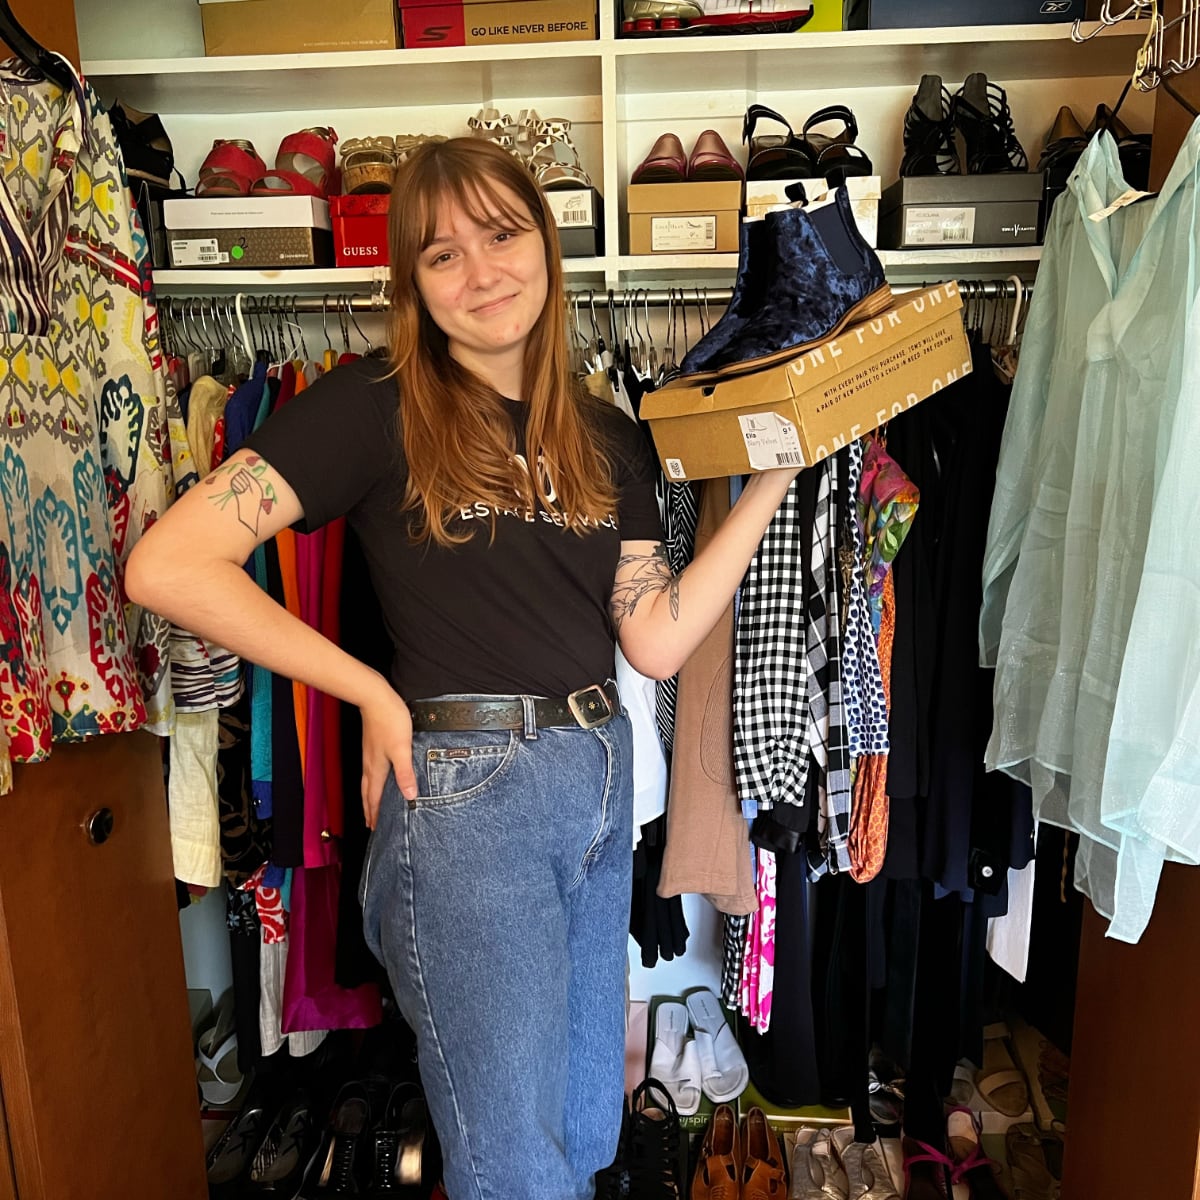 A young woman smiling wearing black tee shirt and jeans holding a shoe box